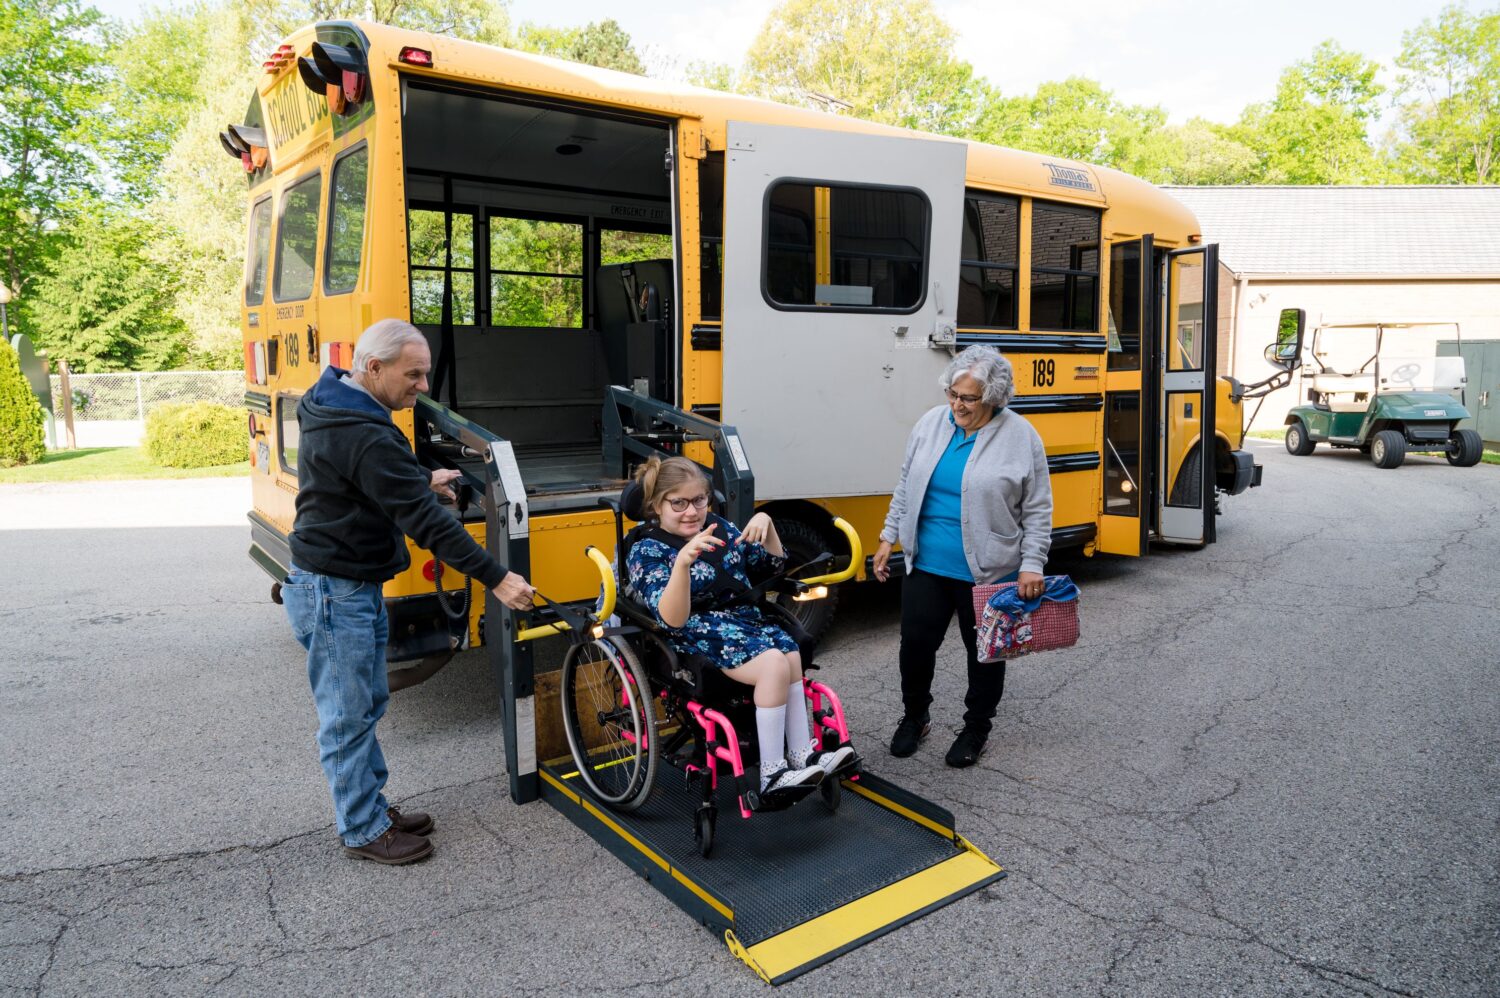 A young girl in a wheelchair is being helped off of a school bus by two McGuire Memorial team members